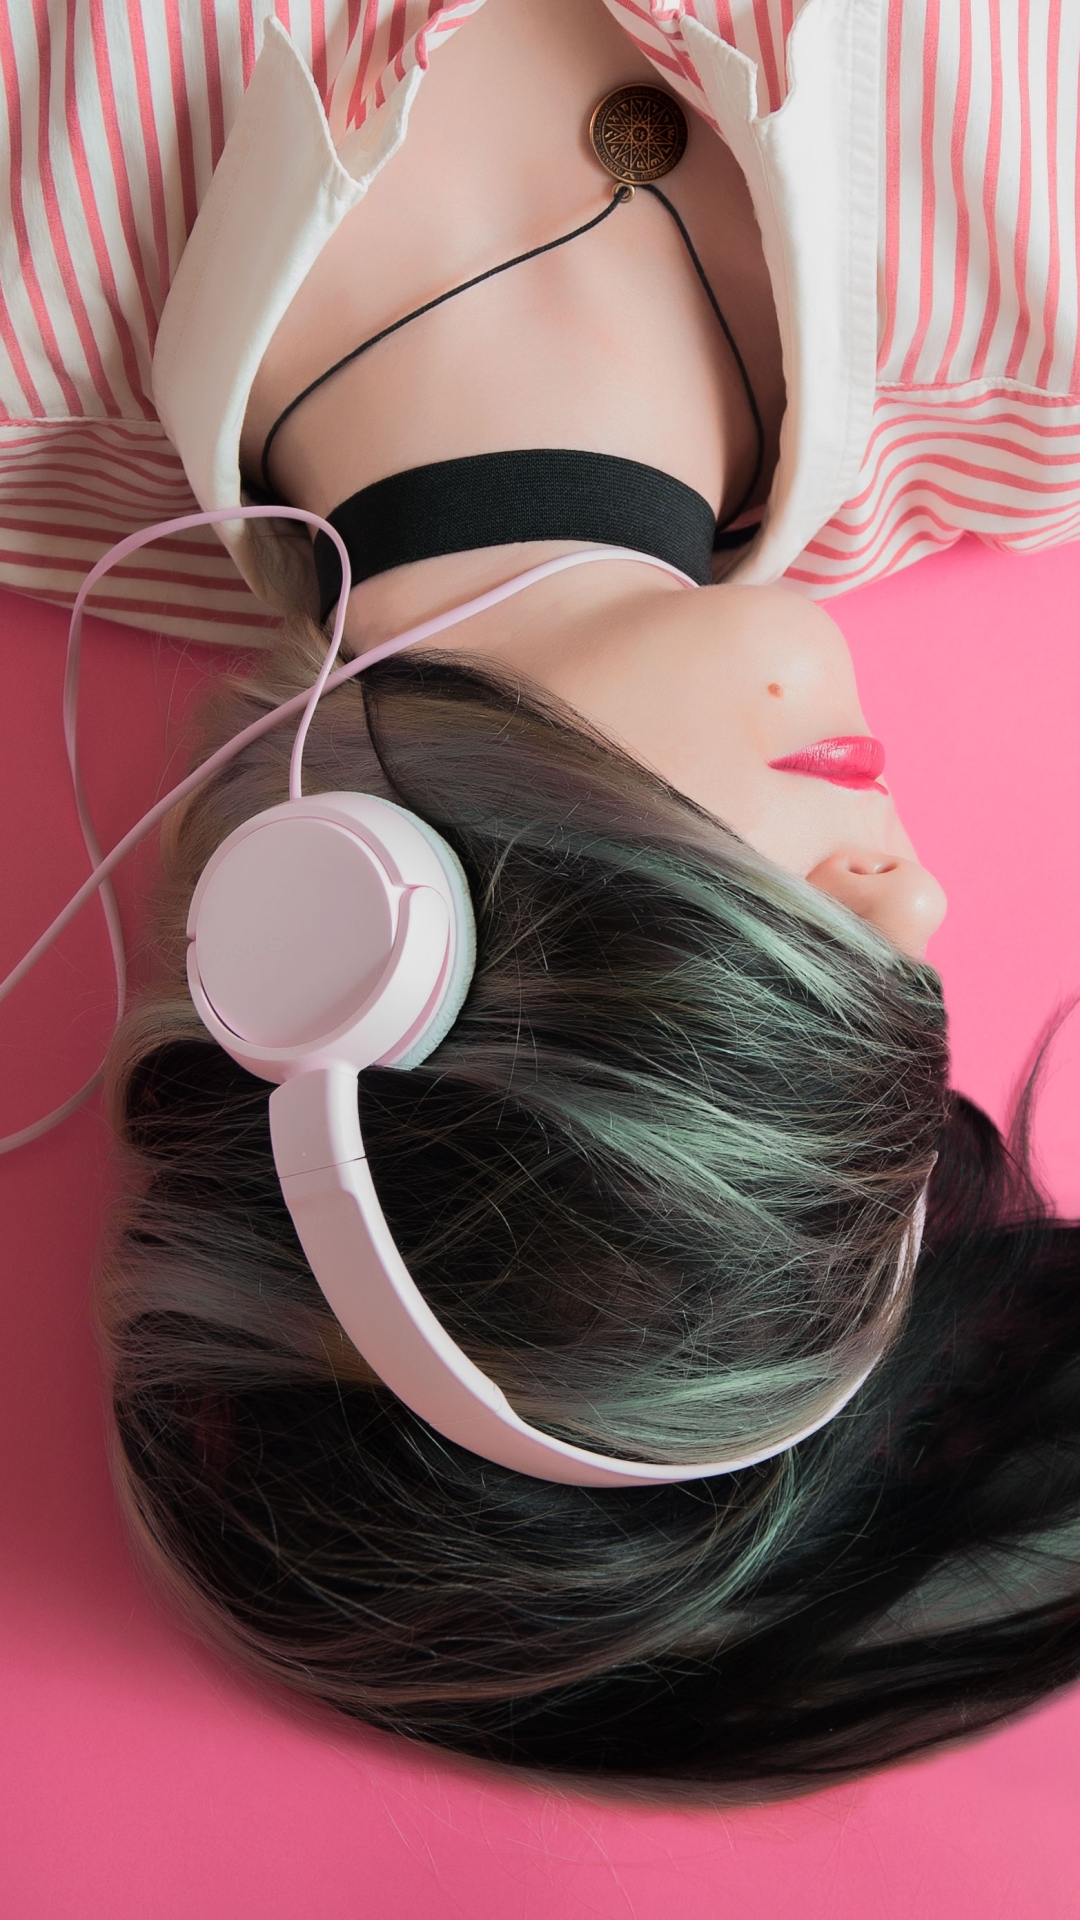 Woman in pink with headphones